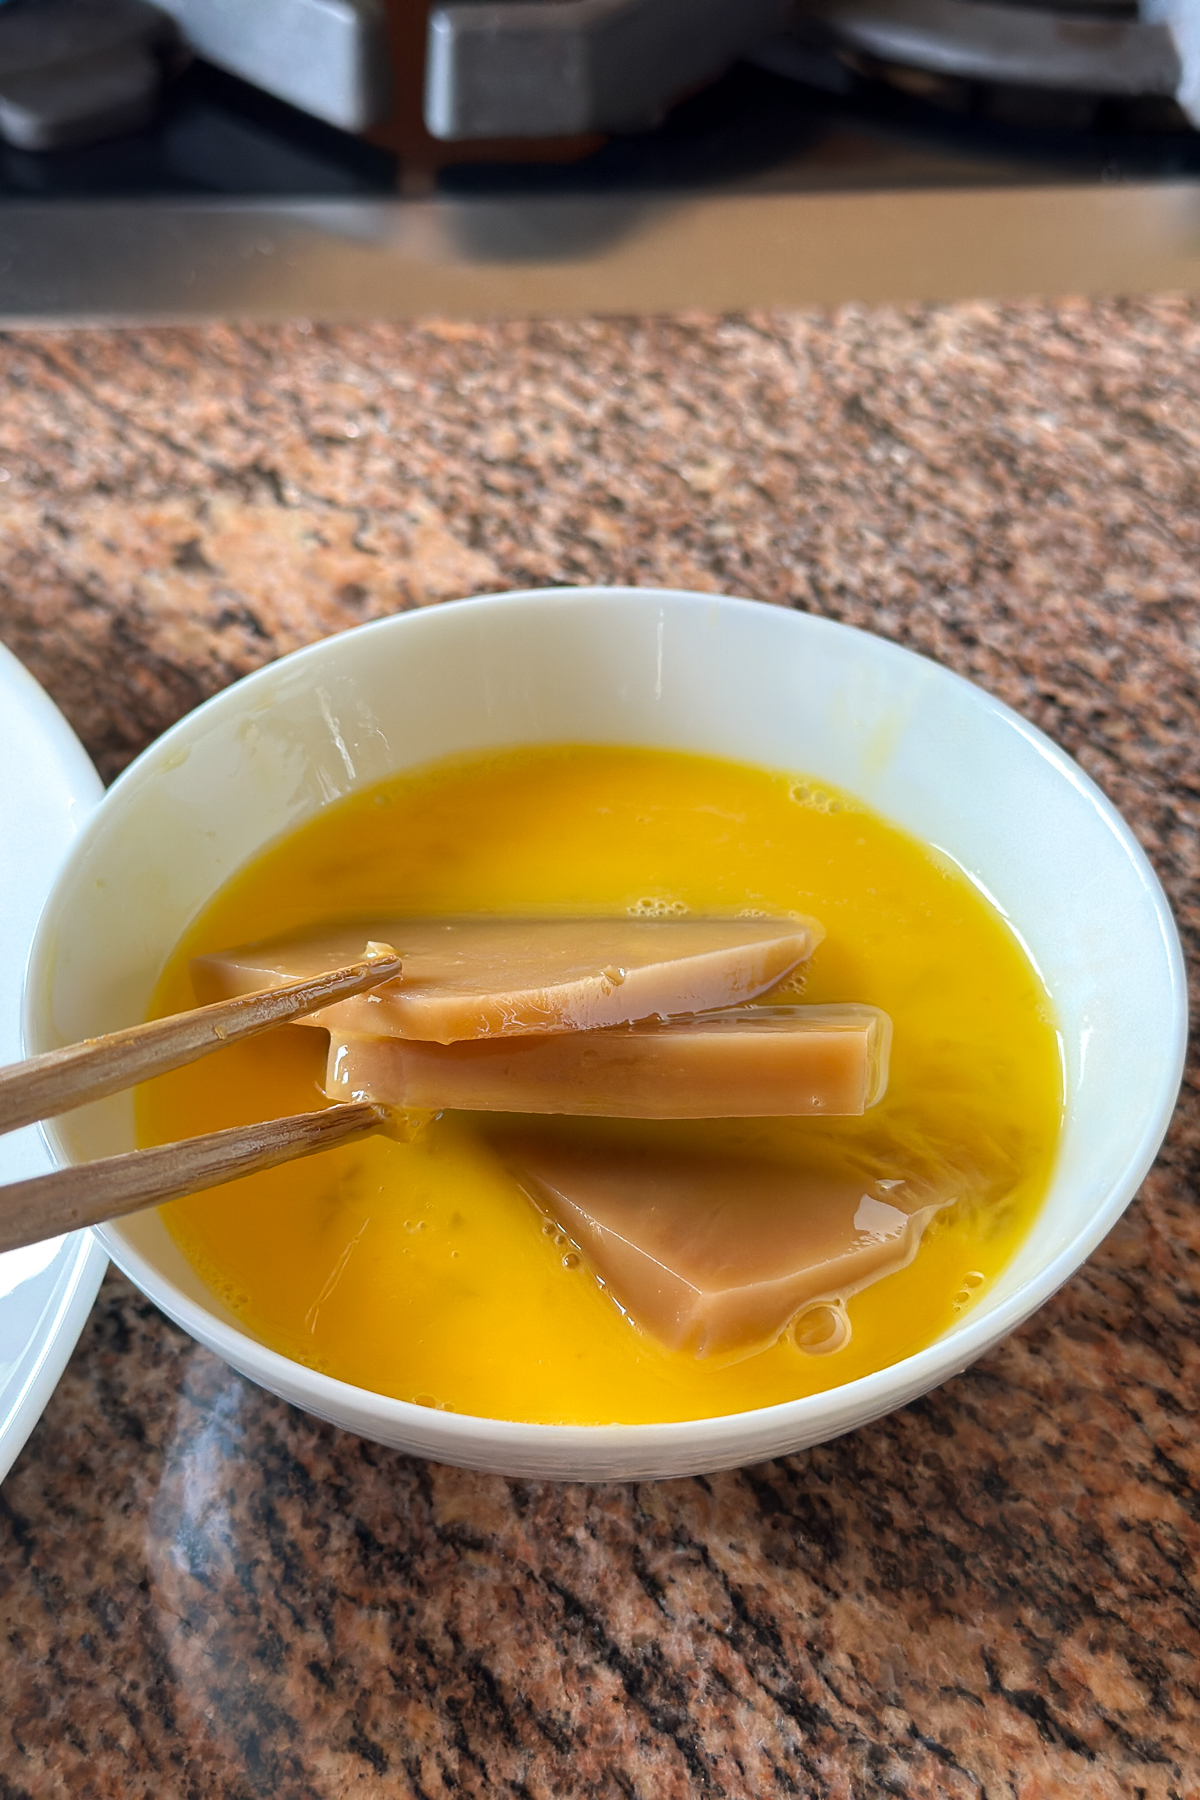 Dipping the nian gao slices in egg.